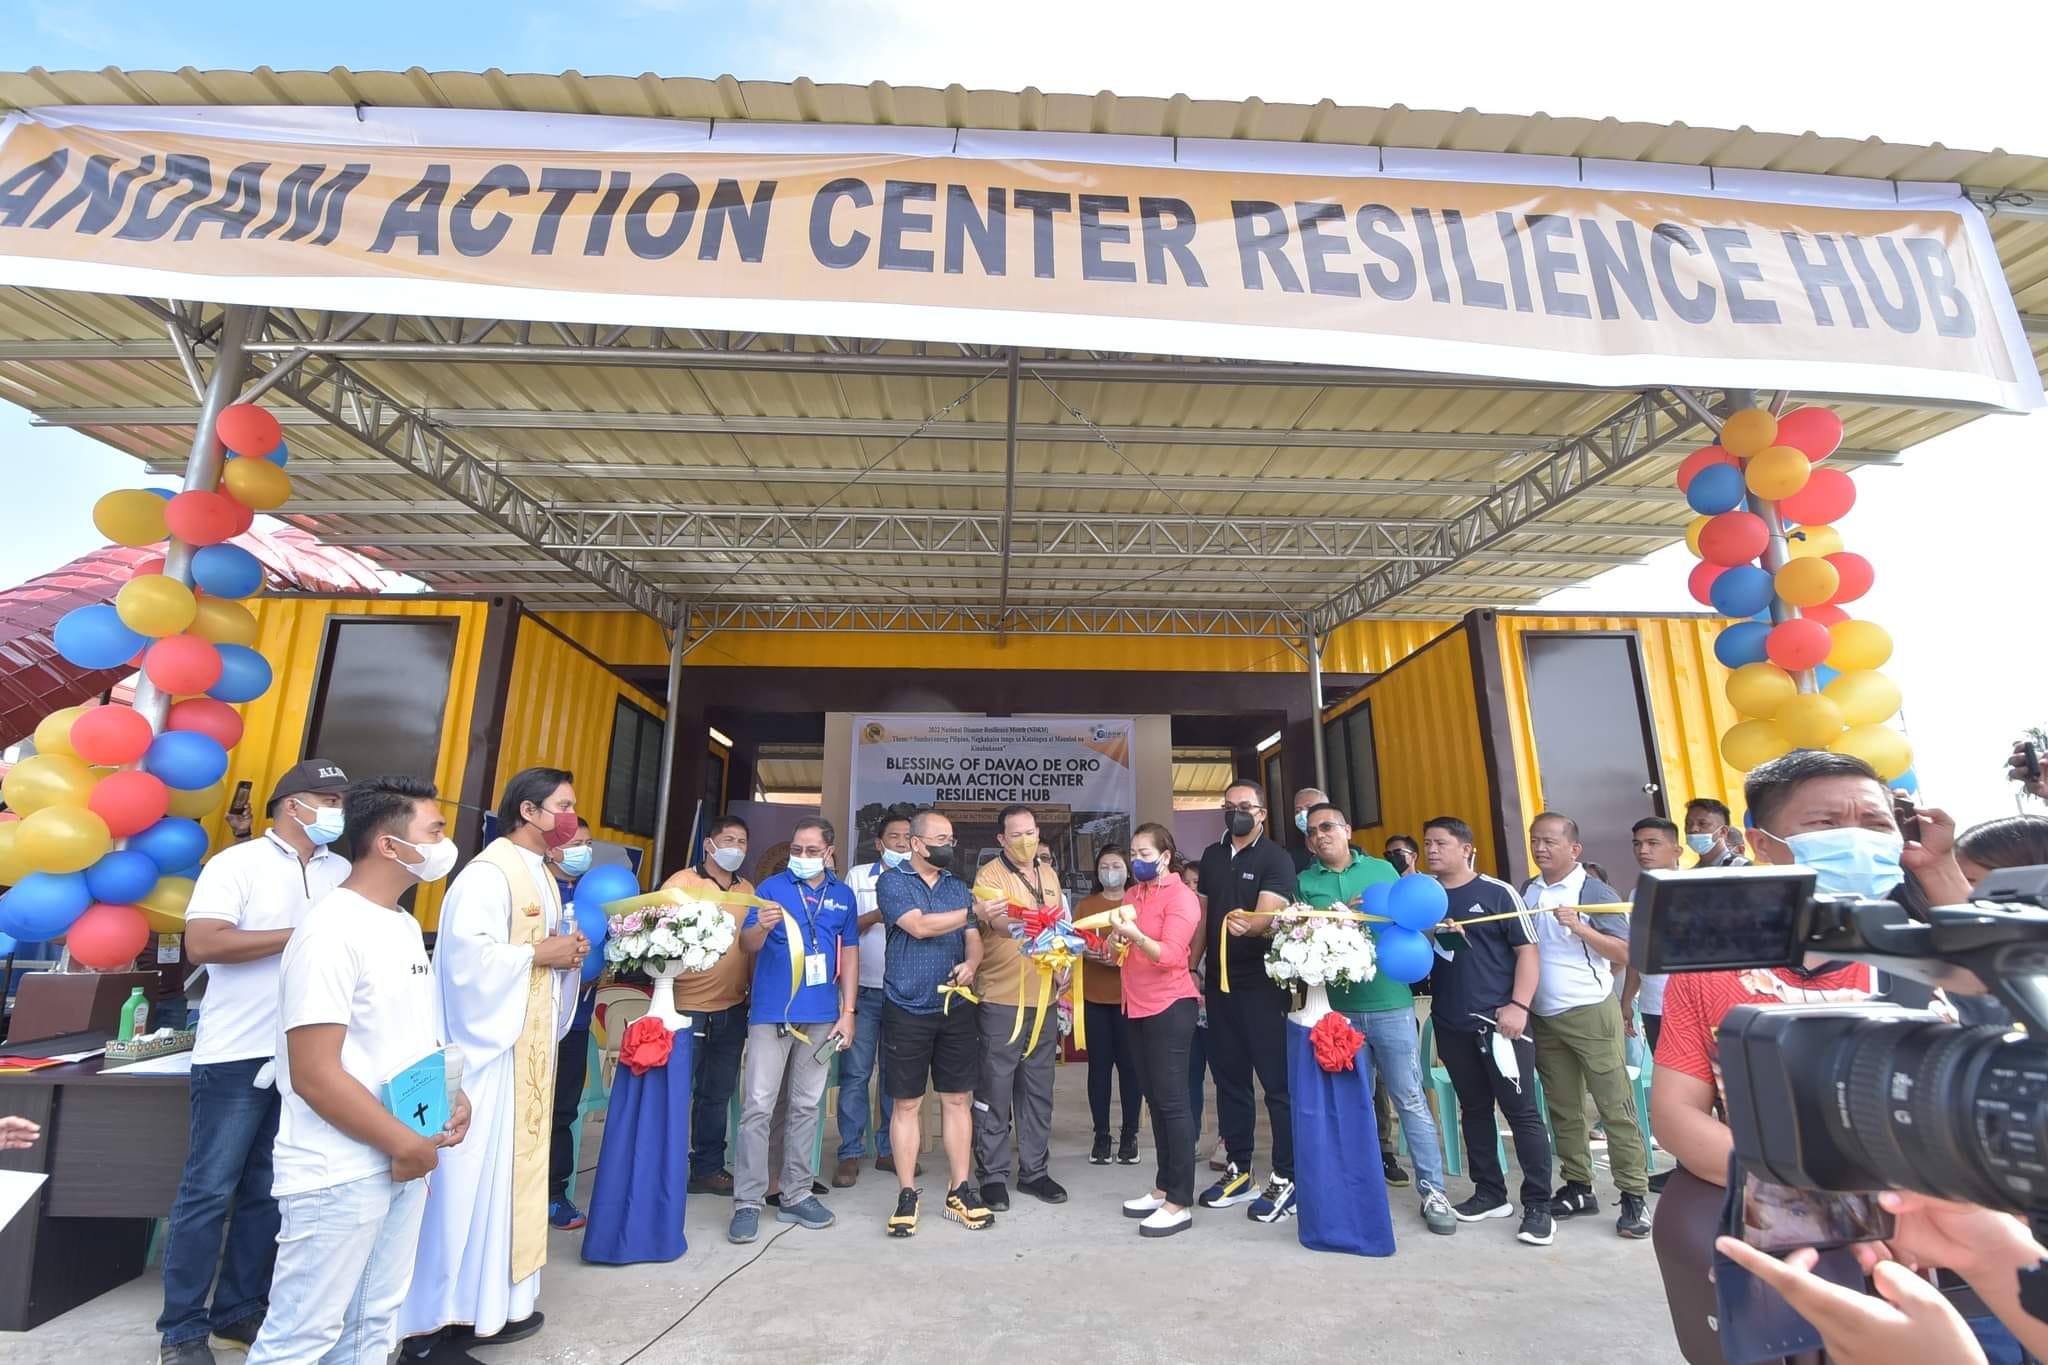 Davao de Oro provincial government opens first action center resilience hub in Pantukan